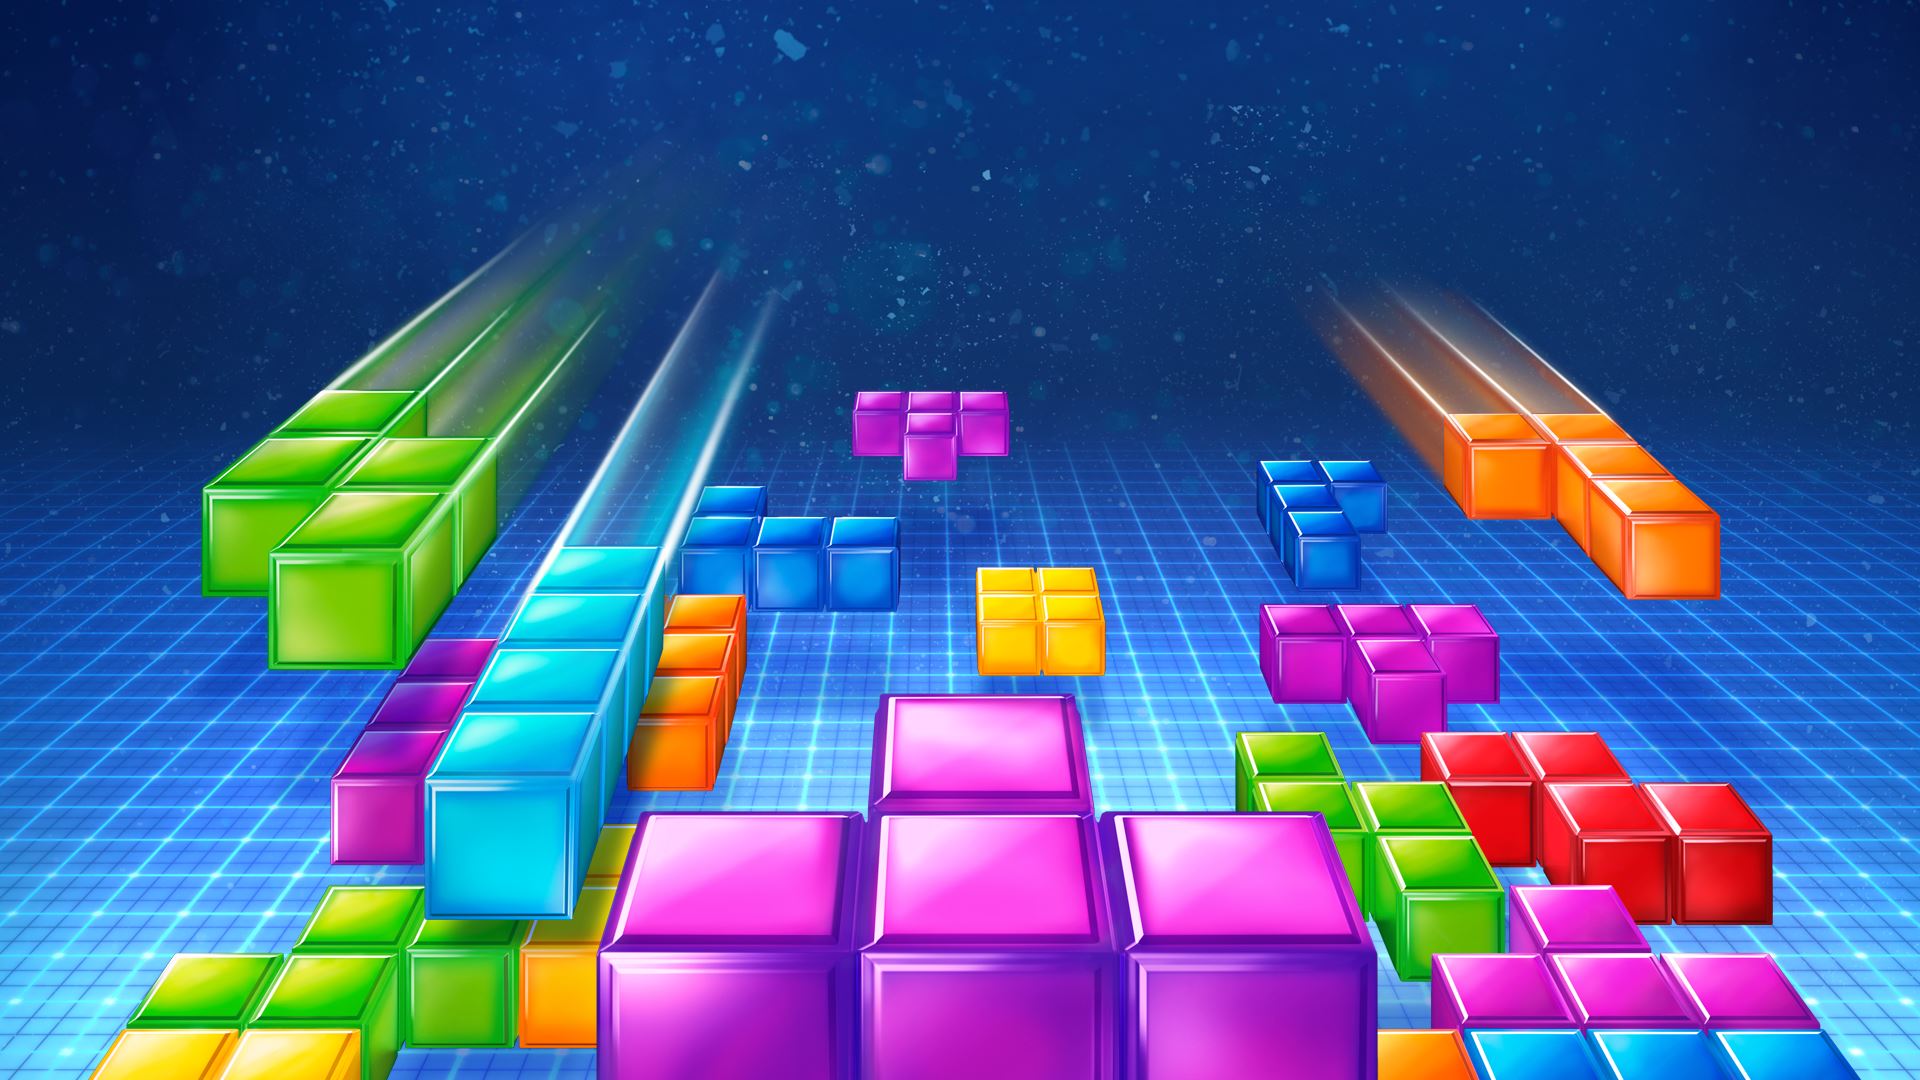 Tetris HD Wallpapers and Background Images   stmednet 1920x1080